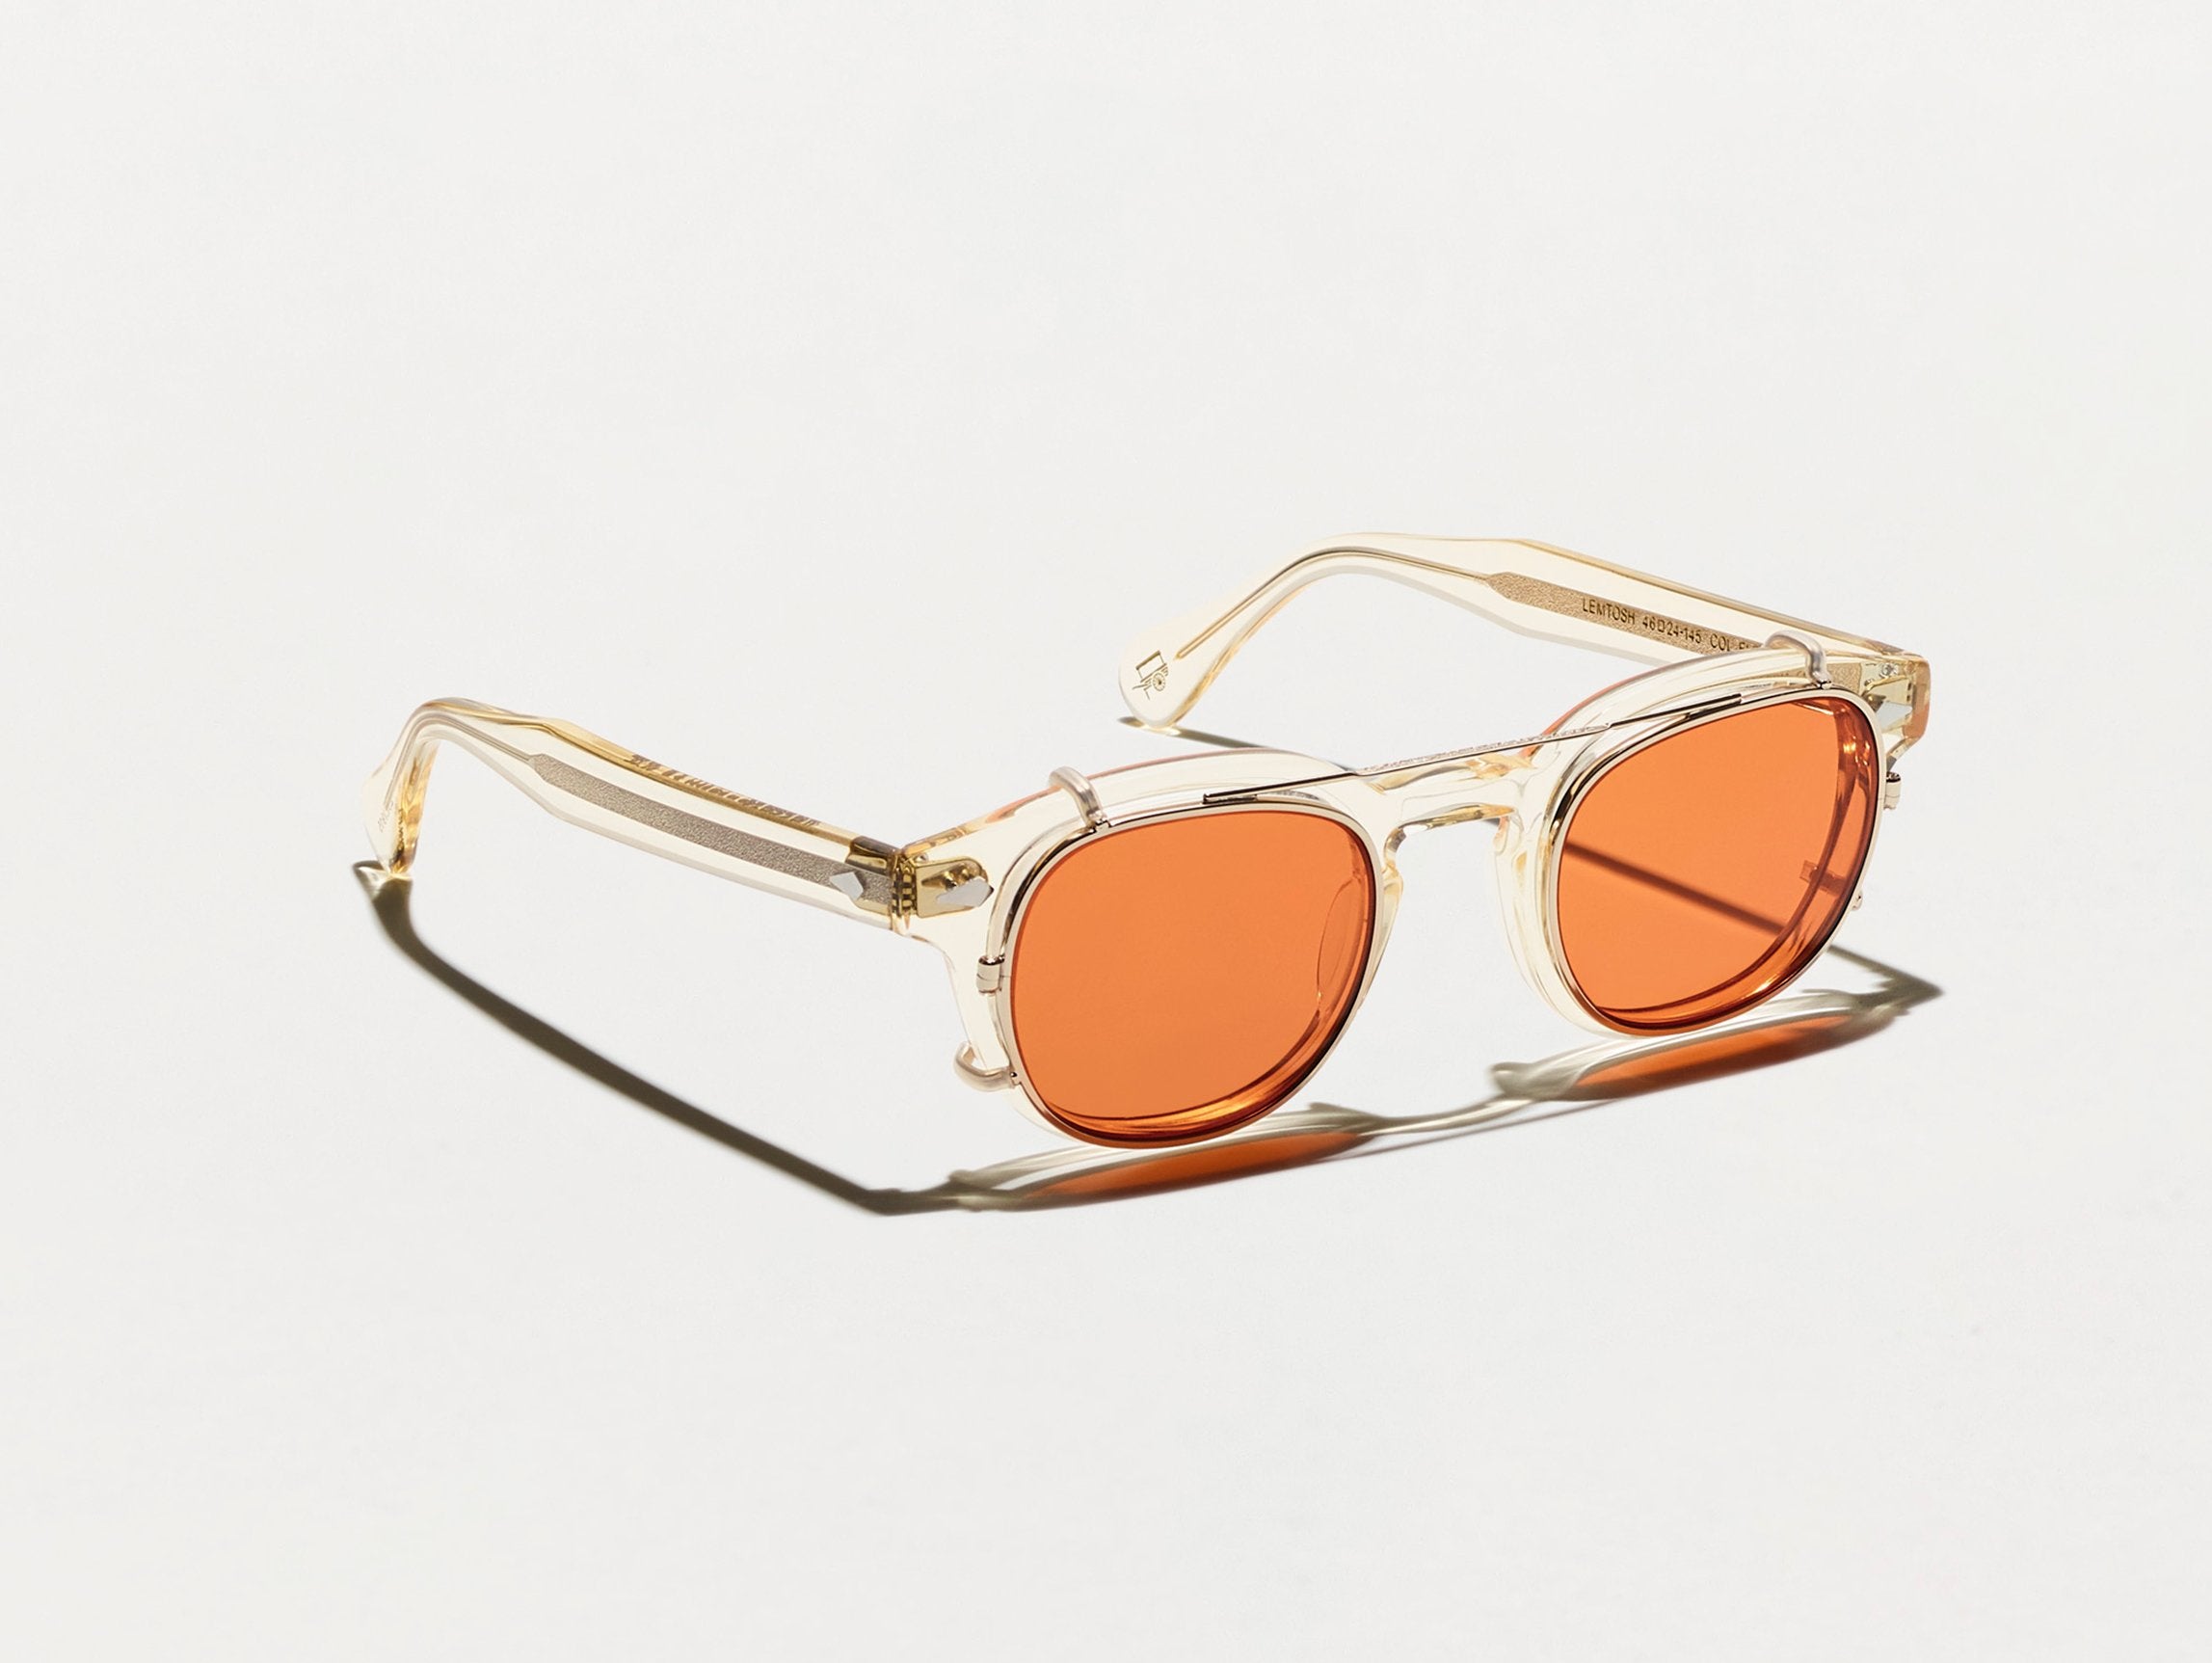 The CLIPTOSH in Gold with Woodstock Orange Tinted Lenses